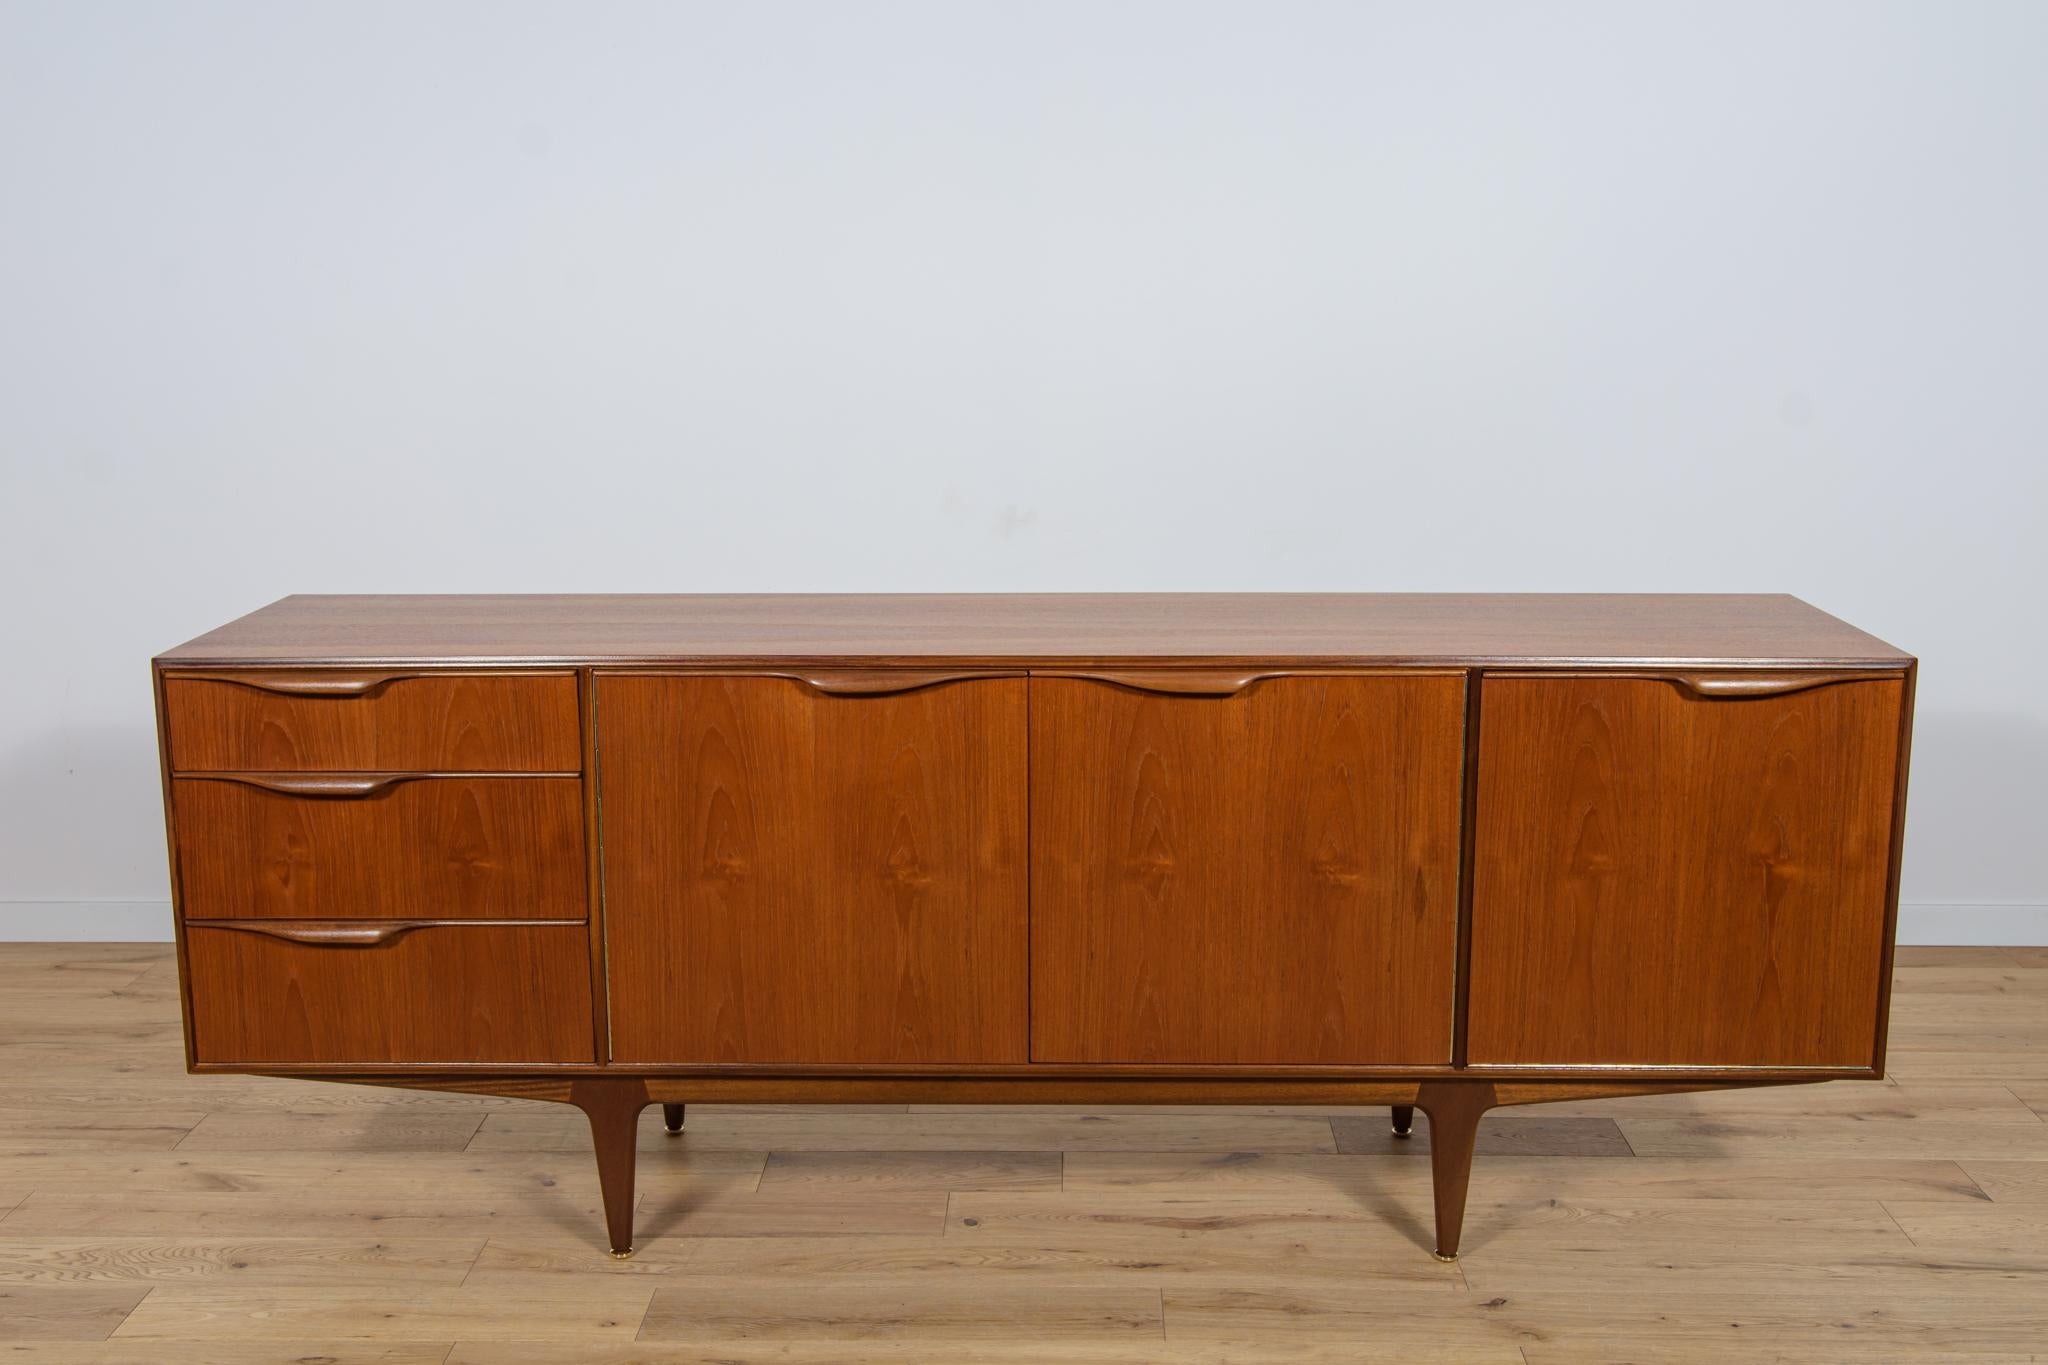 
This mid-century sideboard in teak was produced in Great Britain by Mcintosh in the 1960s. The sideboard has three drawers and a cabinet, on the right side there is a bar and a pull-out top. Sideboard made of teak wood with profiled handles. The